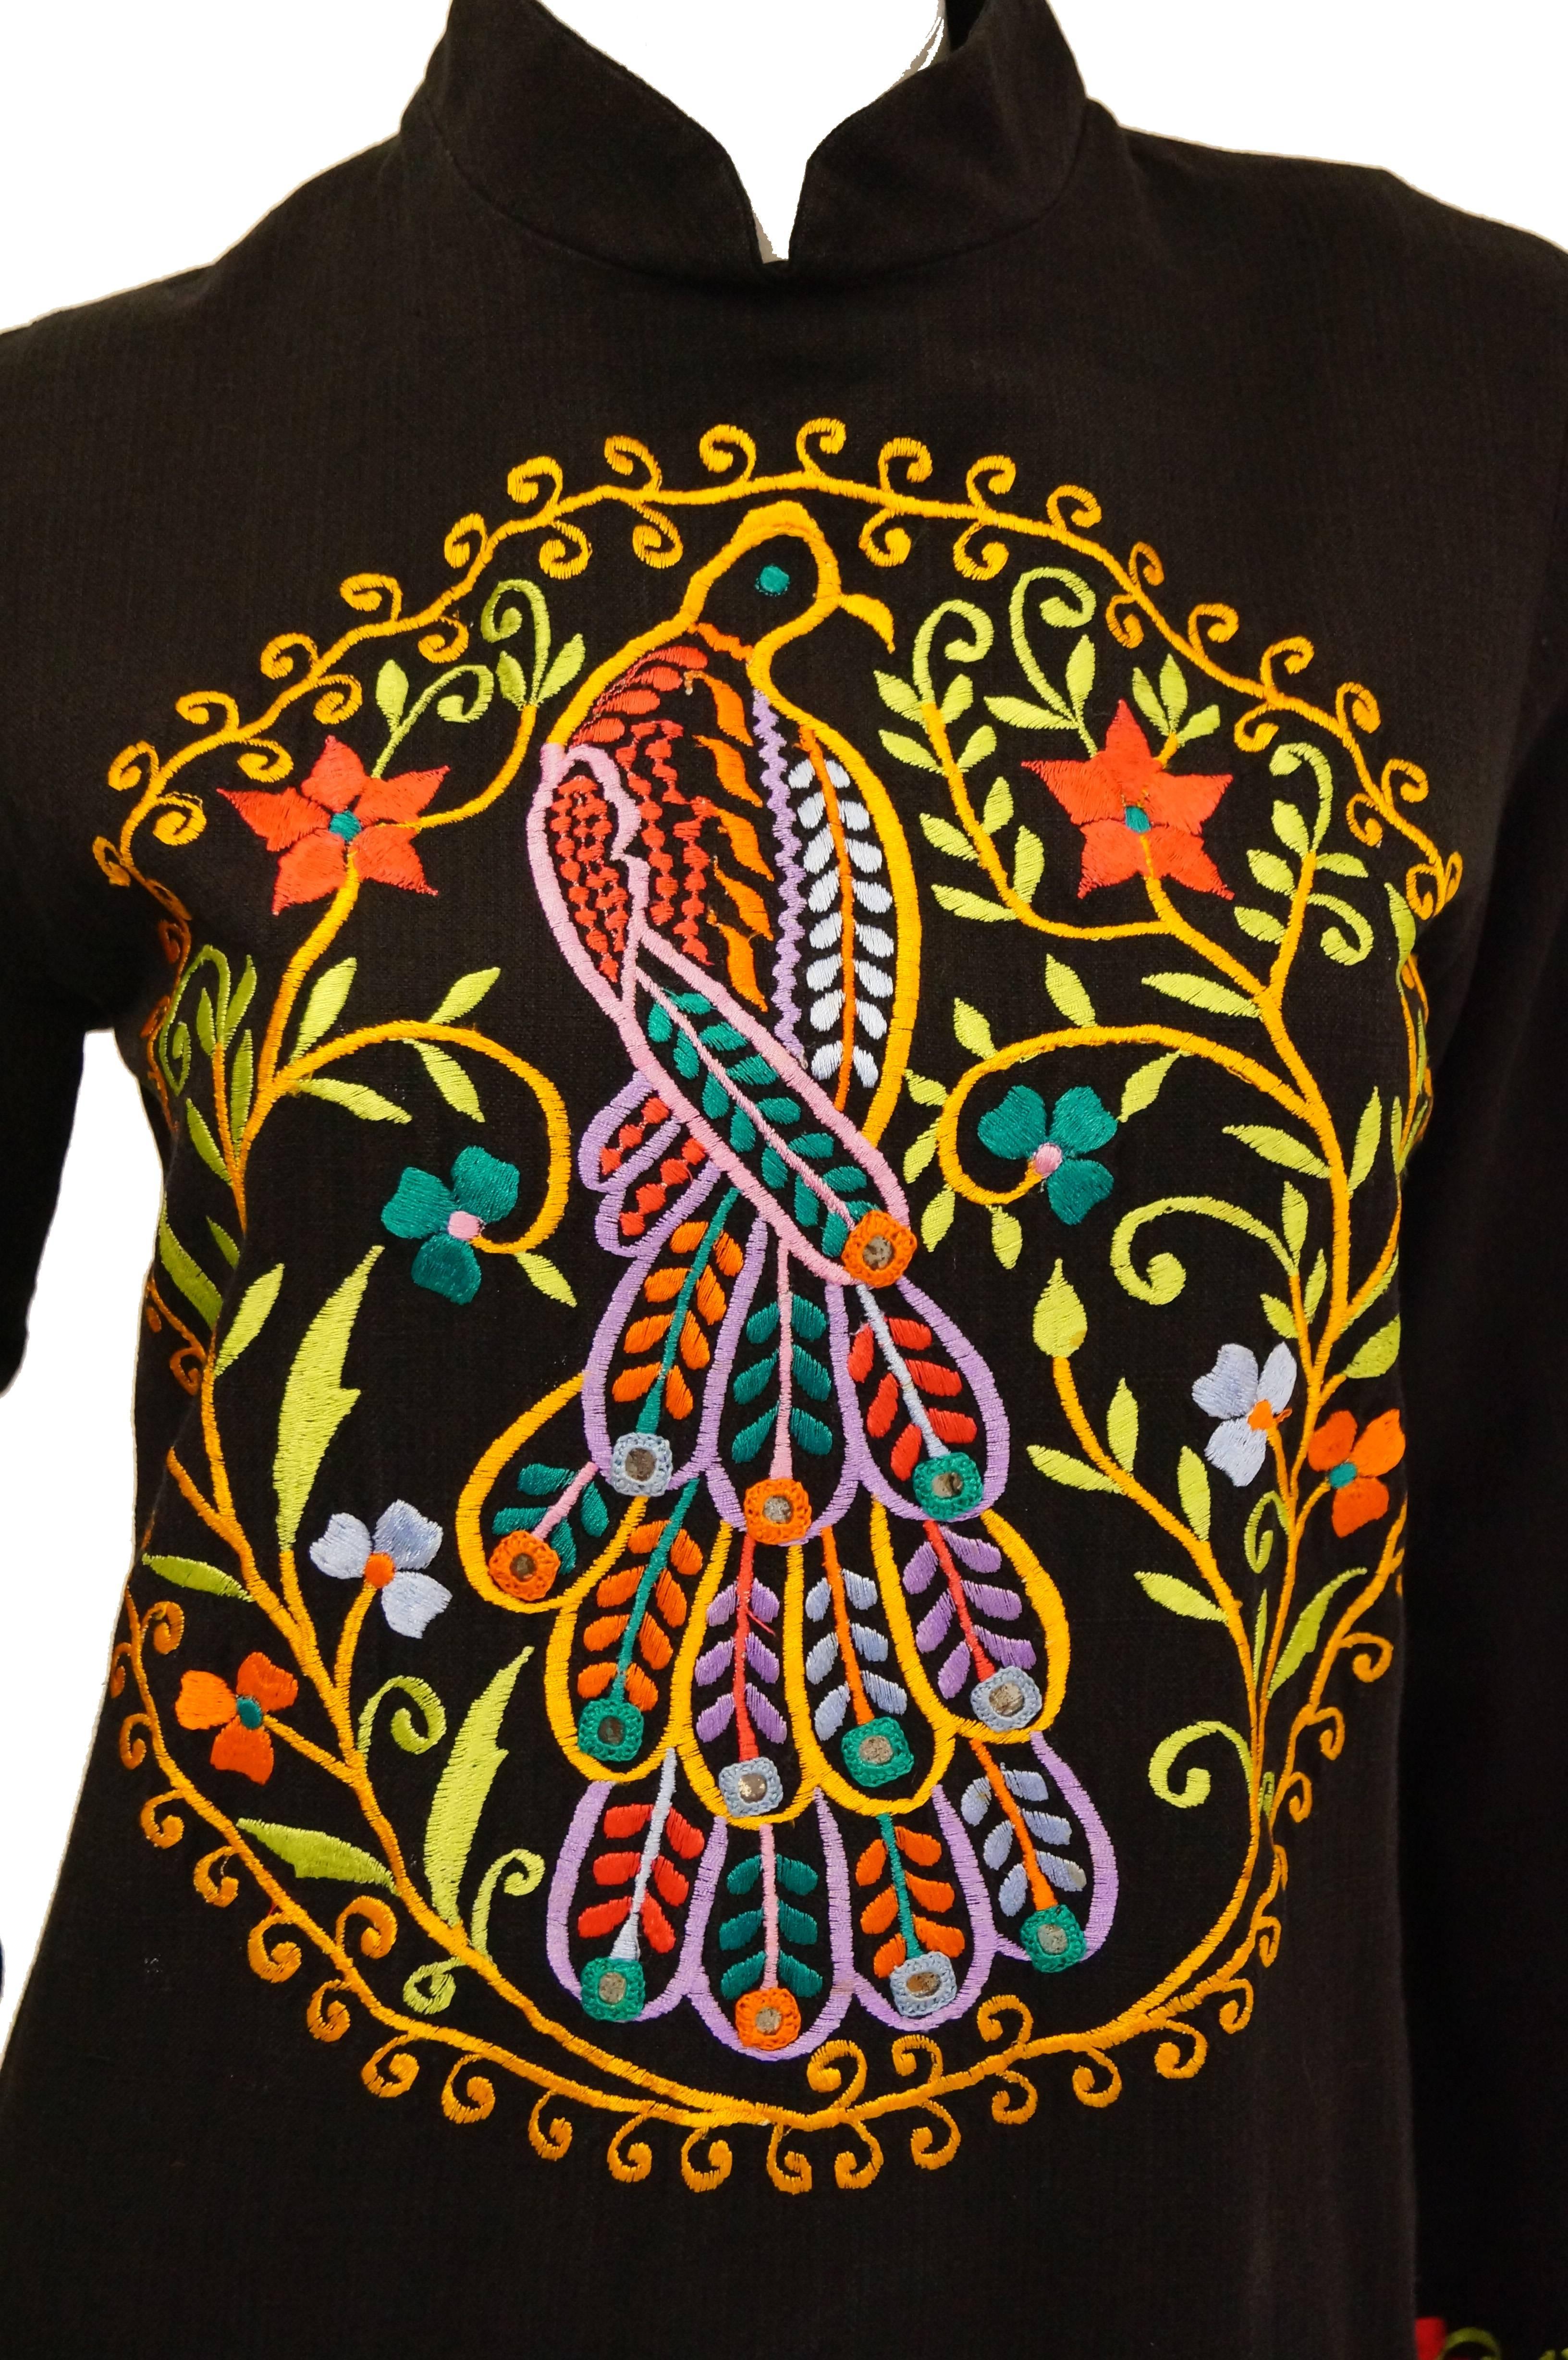 Fabulous colorful peacock embroidered caftan / kaftan by Ramona Rull! The 100% cotton caftan features a high mandarin collar, long sleeves with a slight flare, and has knee-length slits on both legs. The dress is embroidered in a multitude of colors